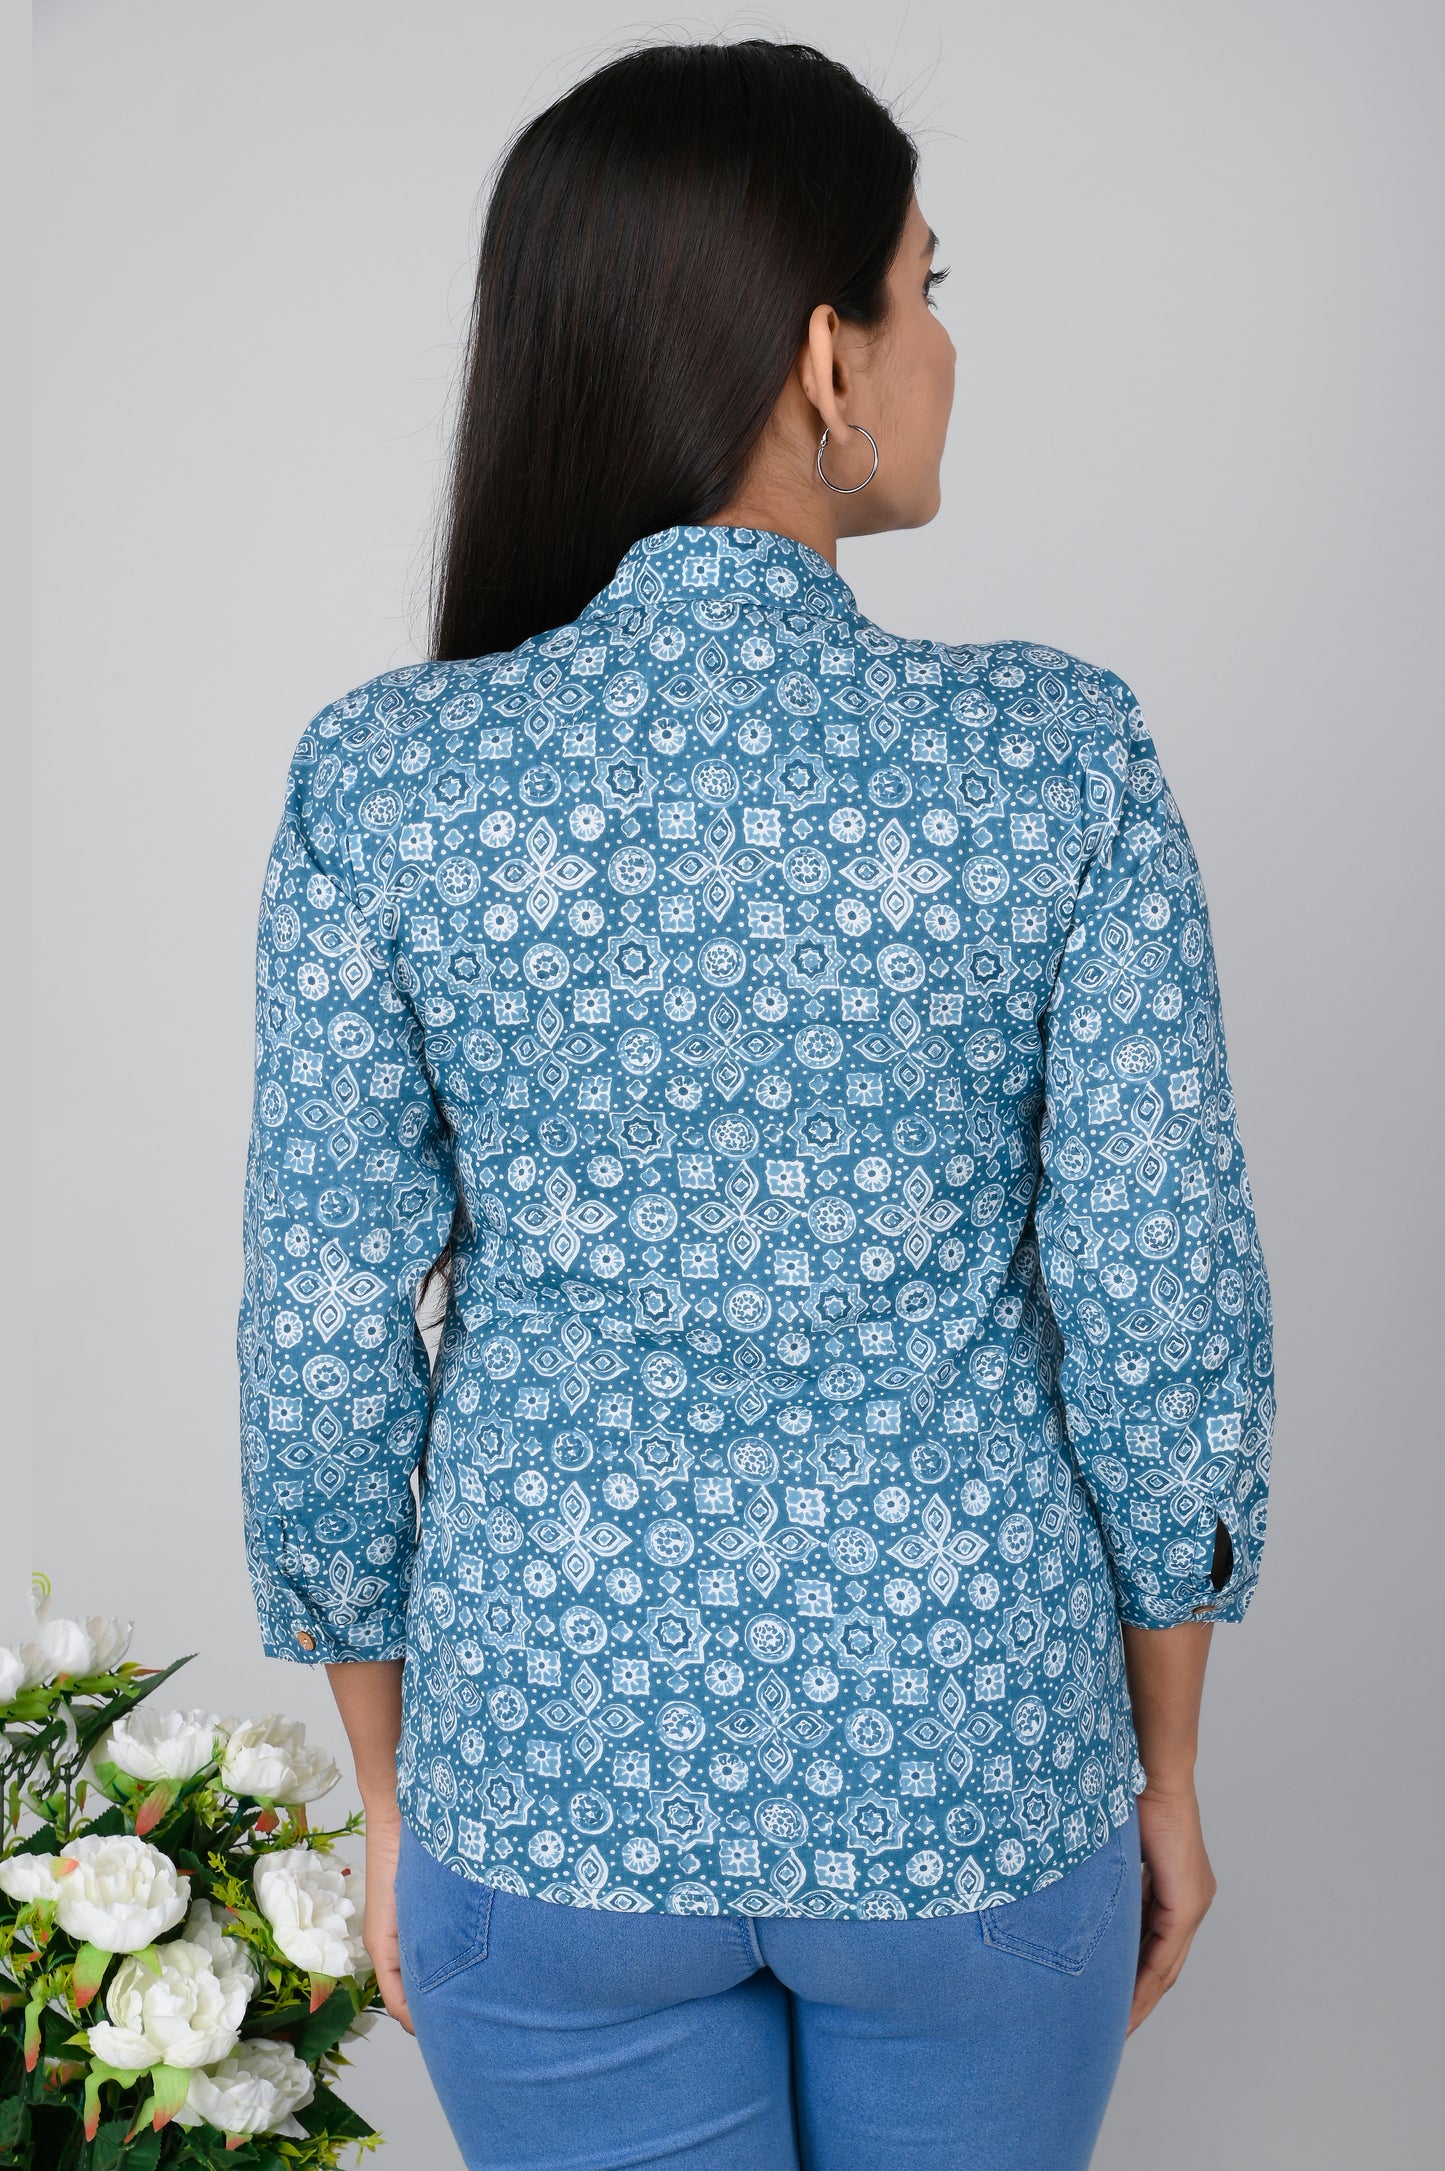 Women's Ethnic floral Printed Shirts